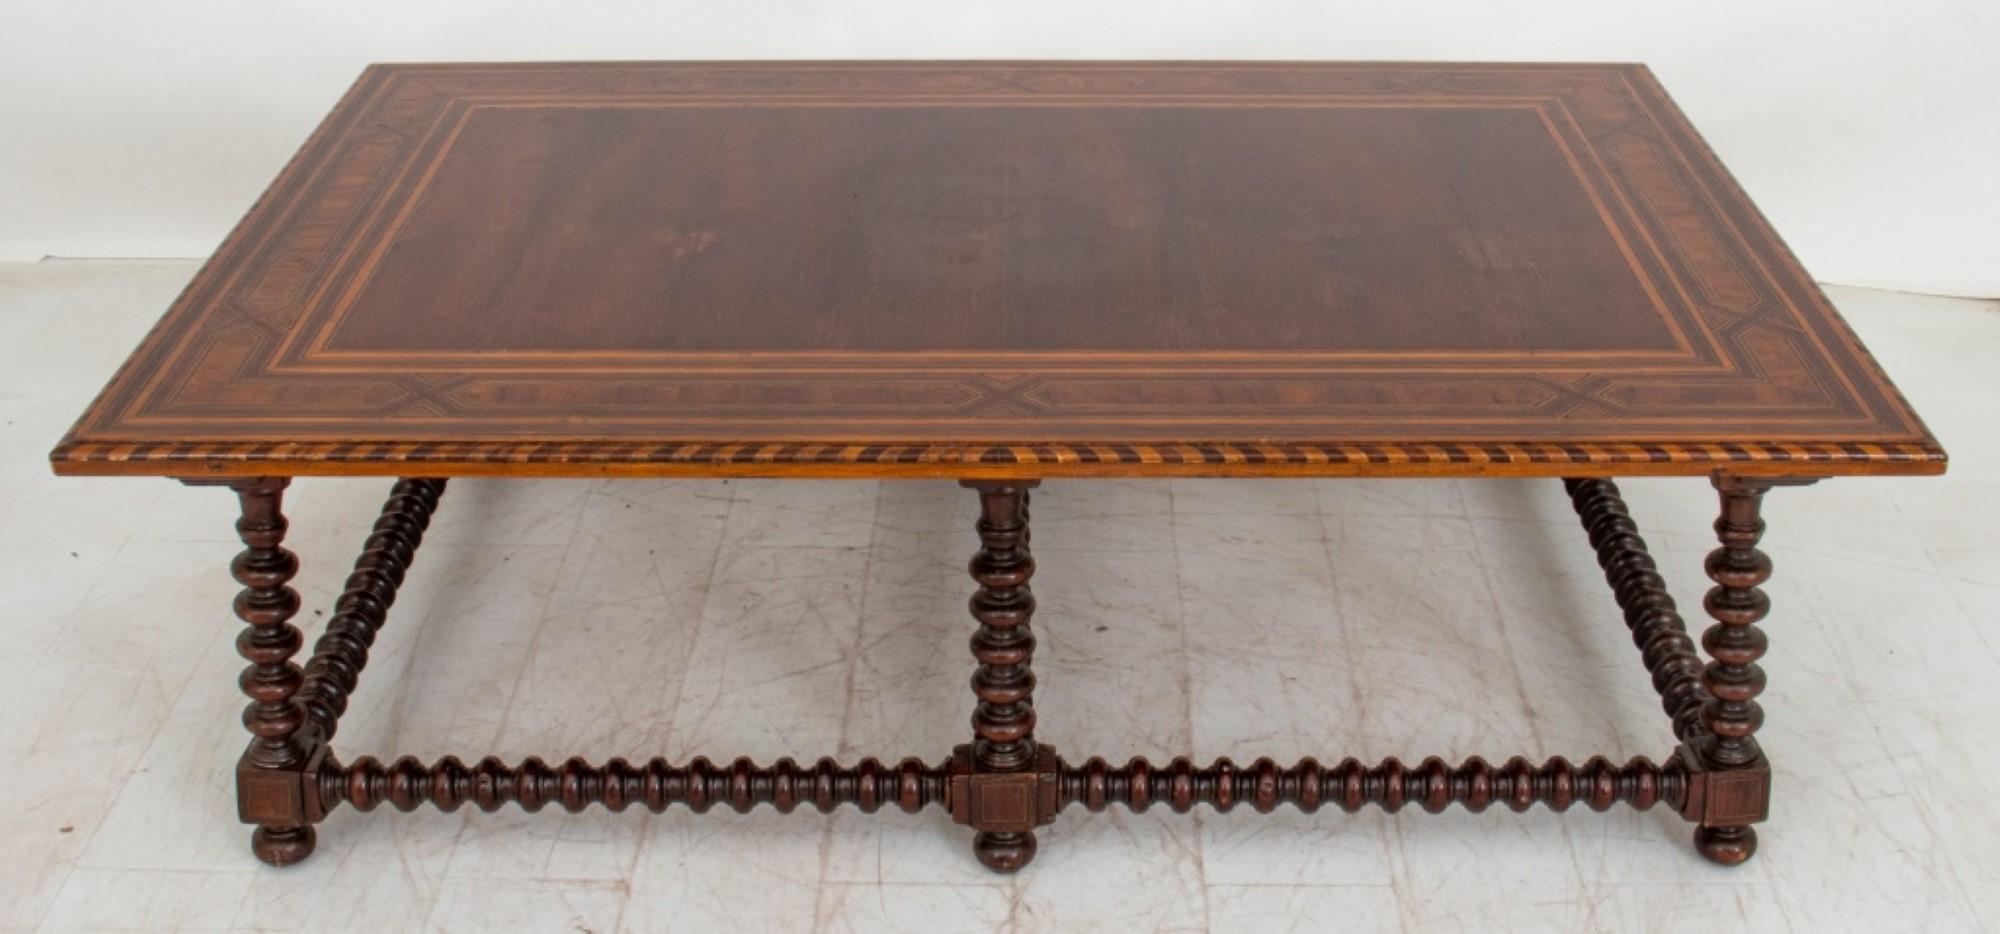 The Spanish Baroque style low table with parquetry inlaid rectangular top, Made in Mexico in the 20th Century. It features characteristics of Spanish Baroque style, Mexican furniture, Hispano-Mauresque, Spanish Colonial style, and Latin American